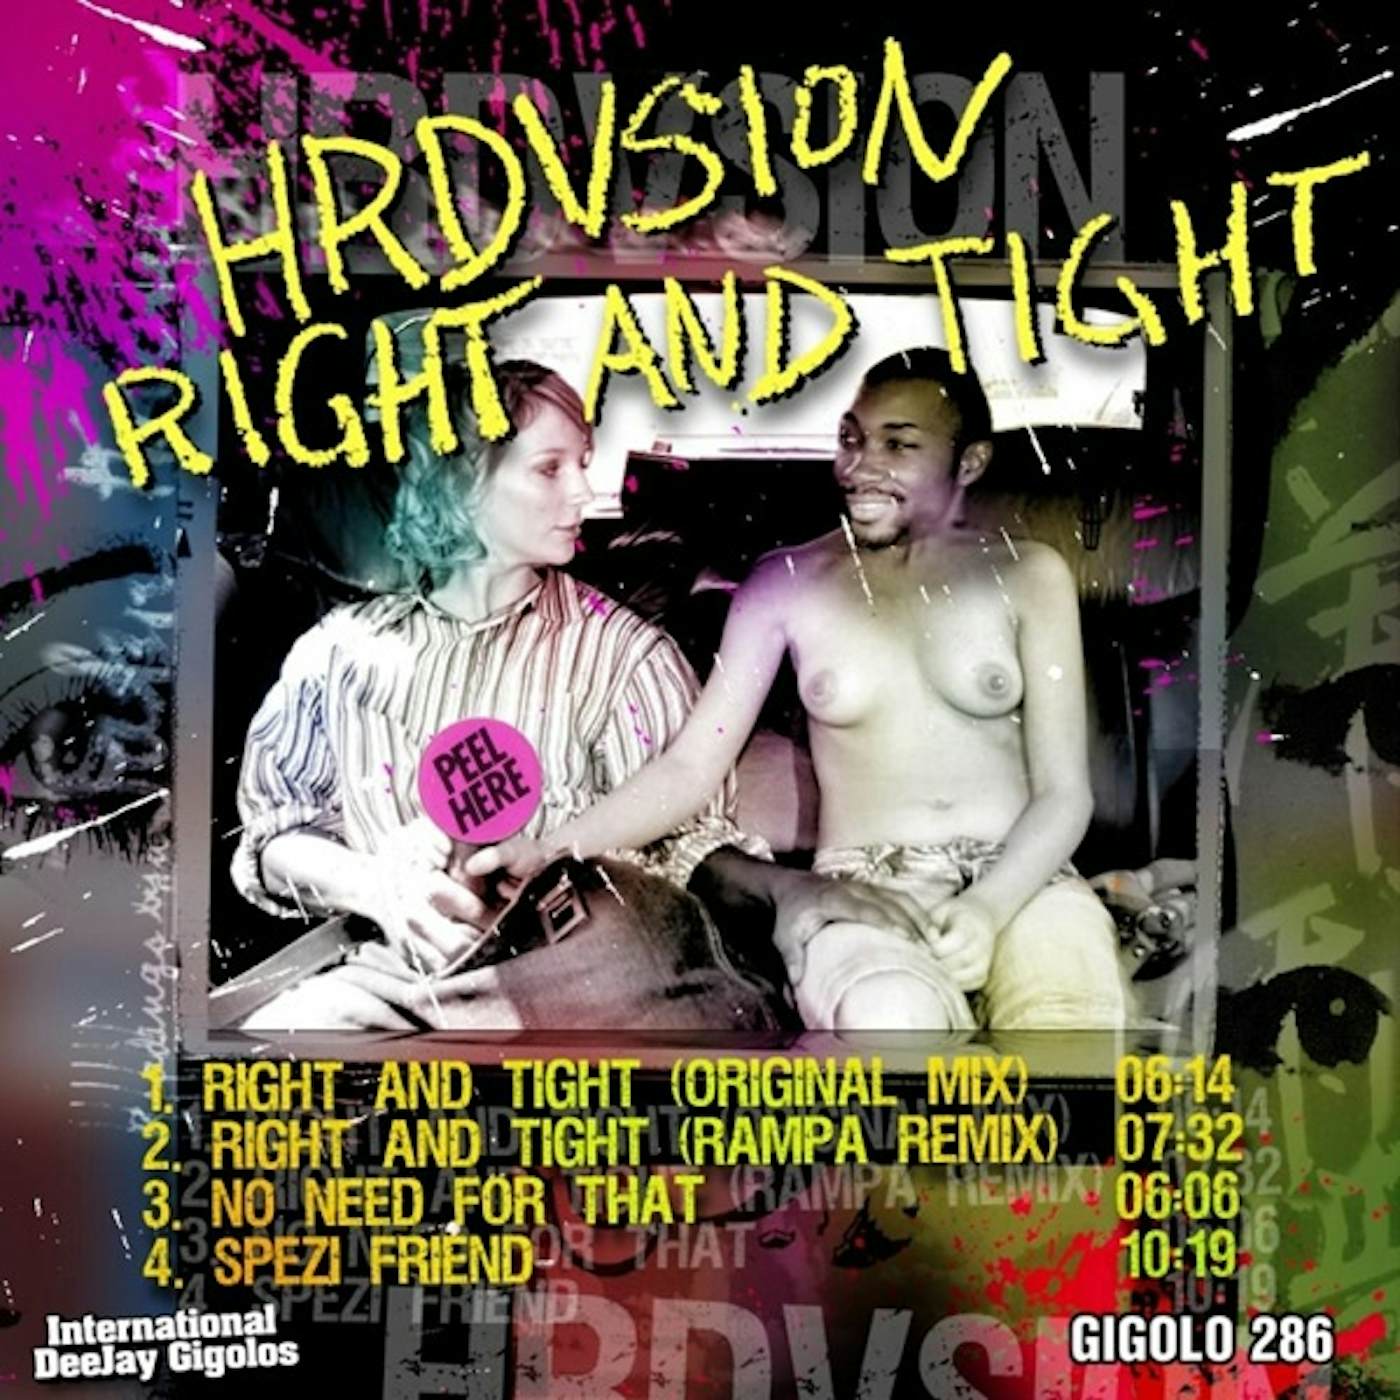 Hrdvsion Right And Tight Vinyl Record